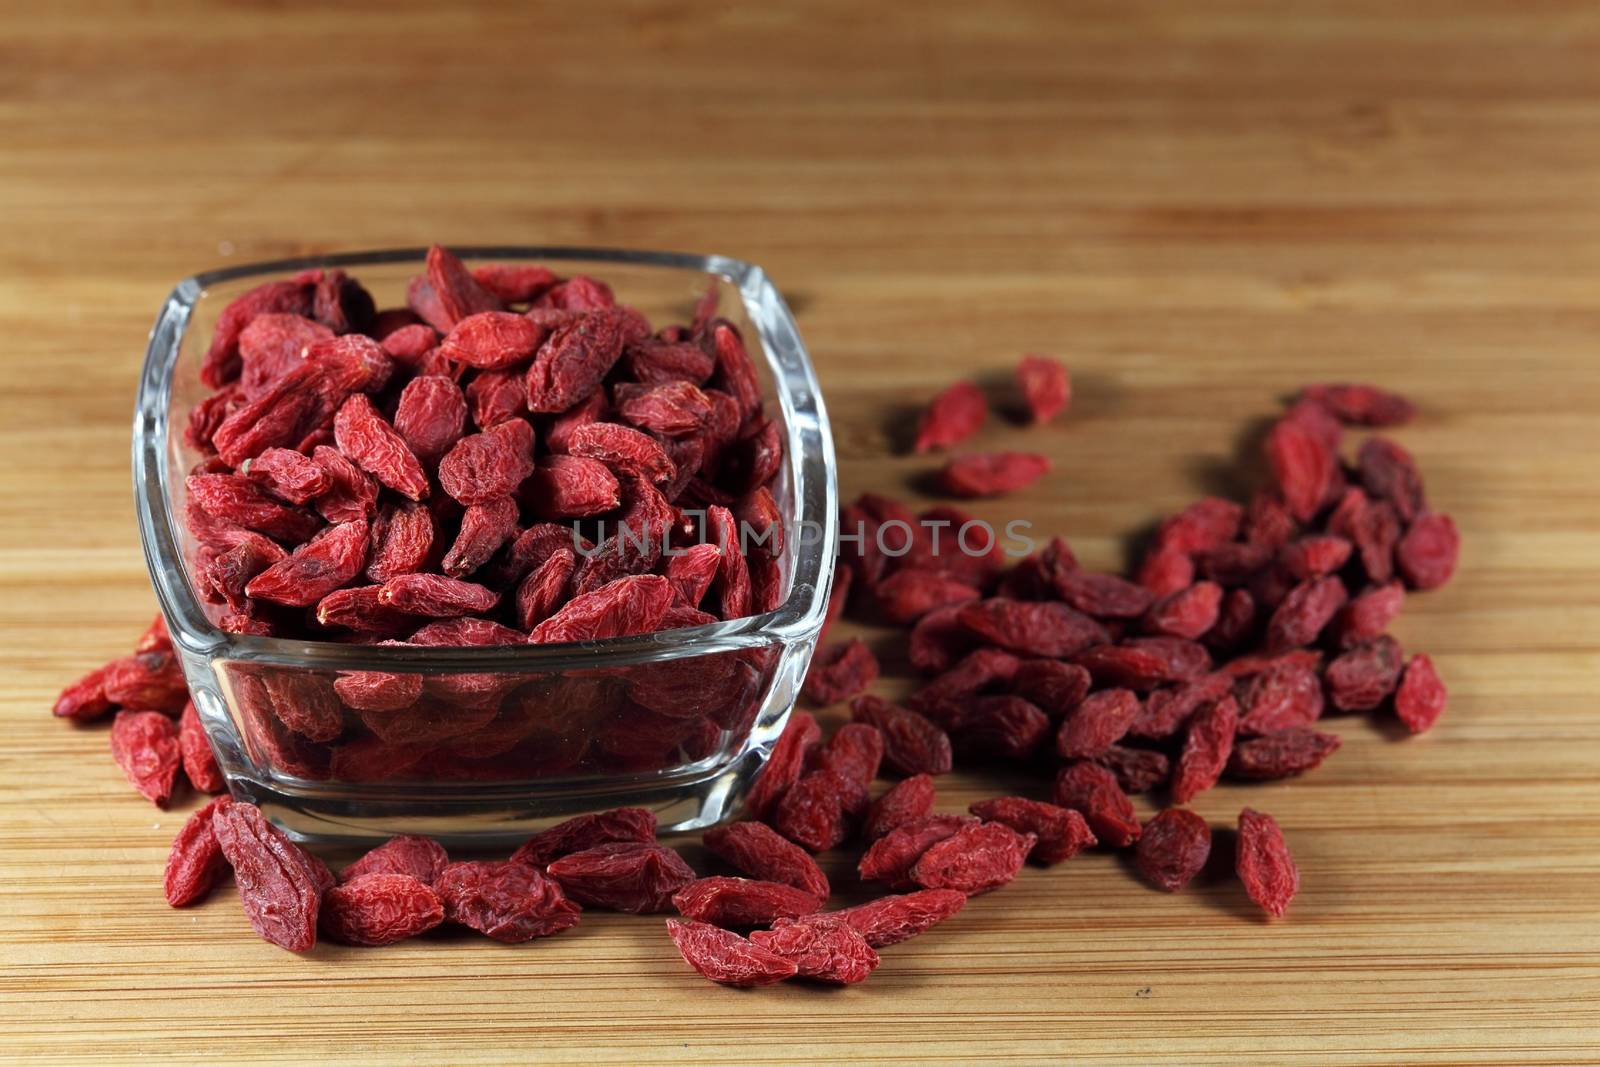 Dry goji berries in a glass bowl.